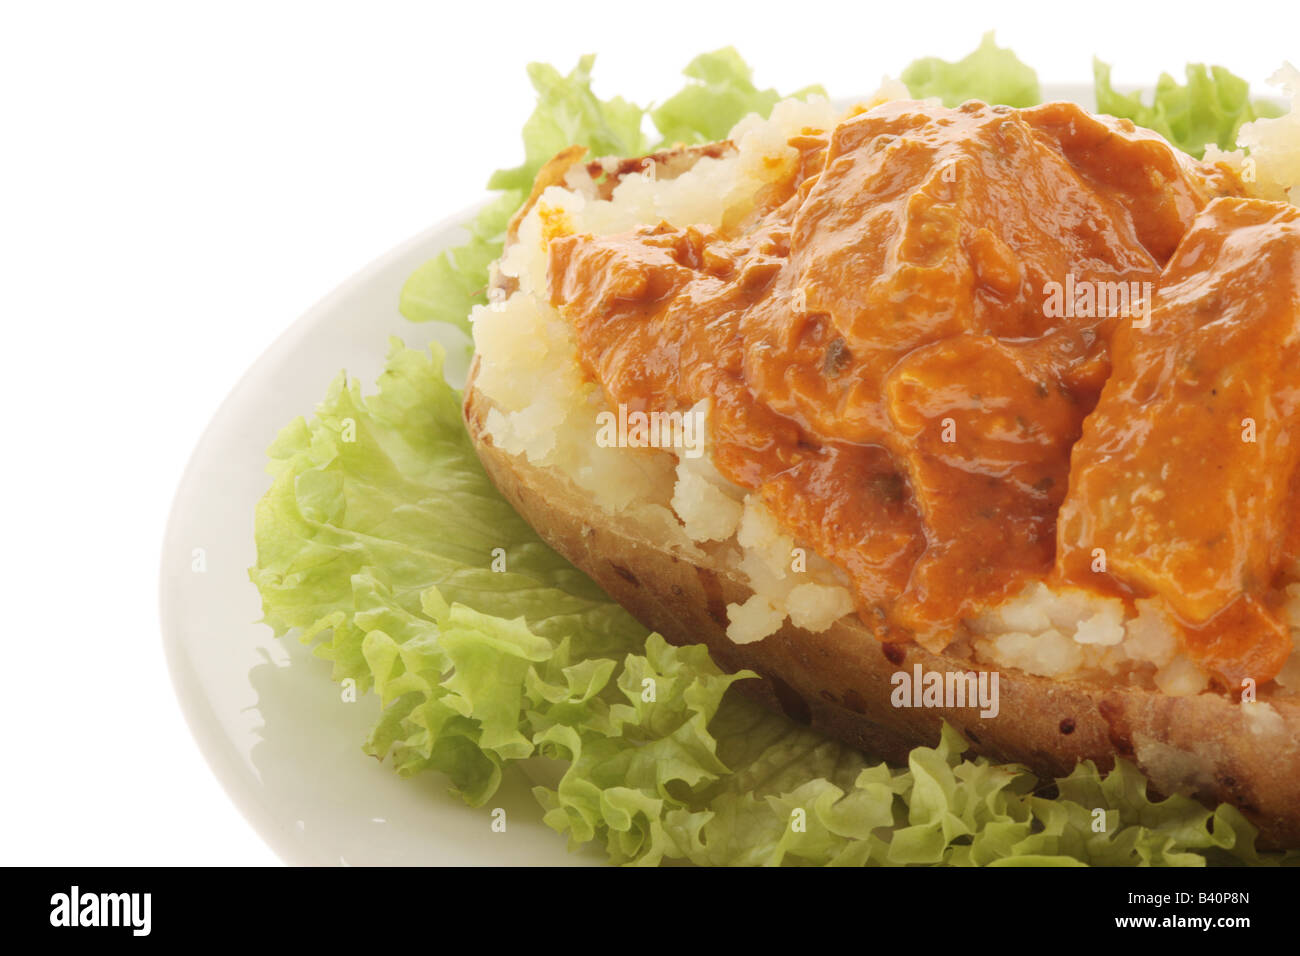 Freshly Baked Jacket Potato Filled With Indian Style Spicy Chicken Tikka  Masala Curry And No People Stock Photo - Alamy